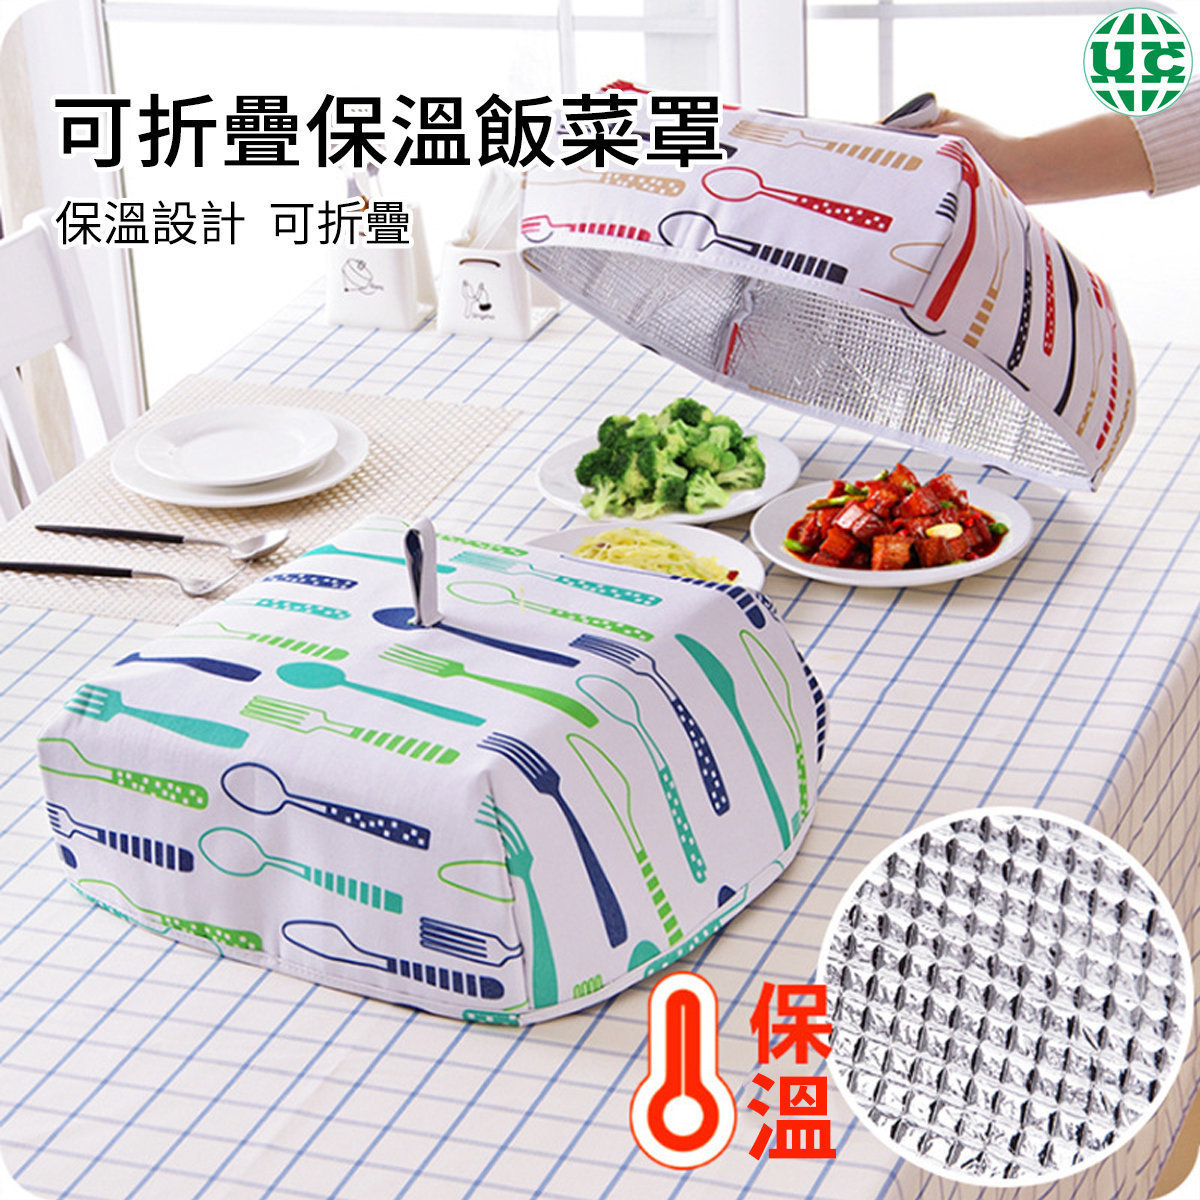 Foldable Insulated Meal Cover Extra Large 50*50*15cm-Blue